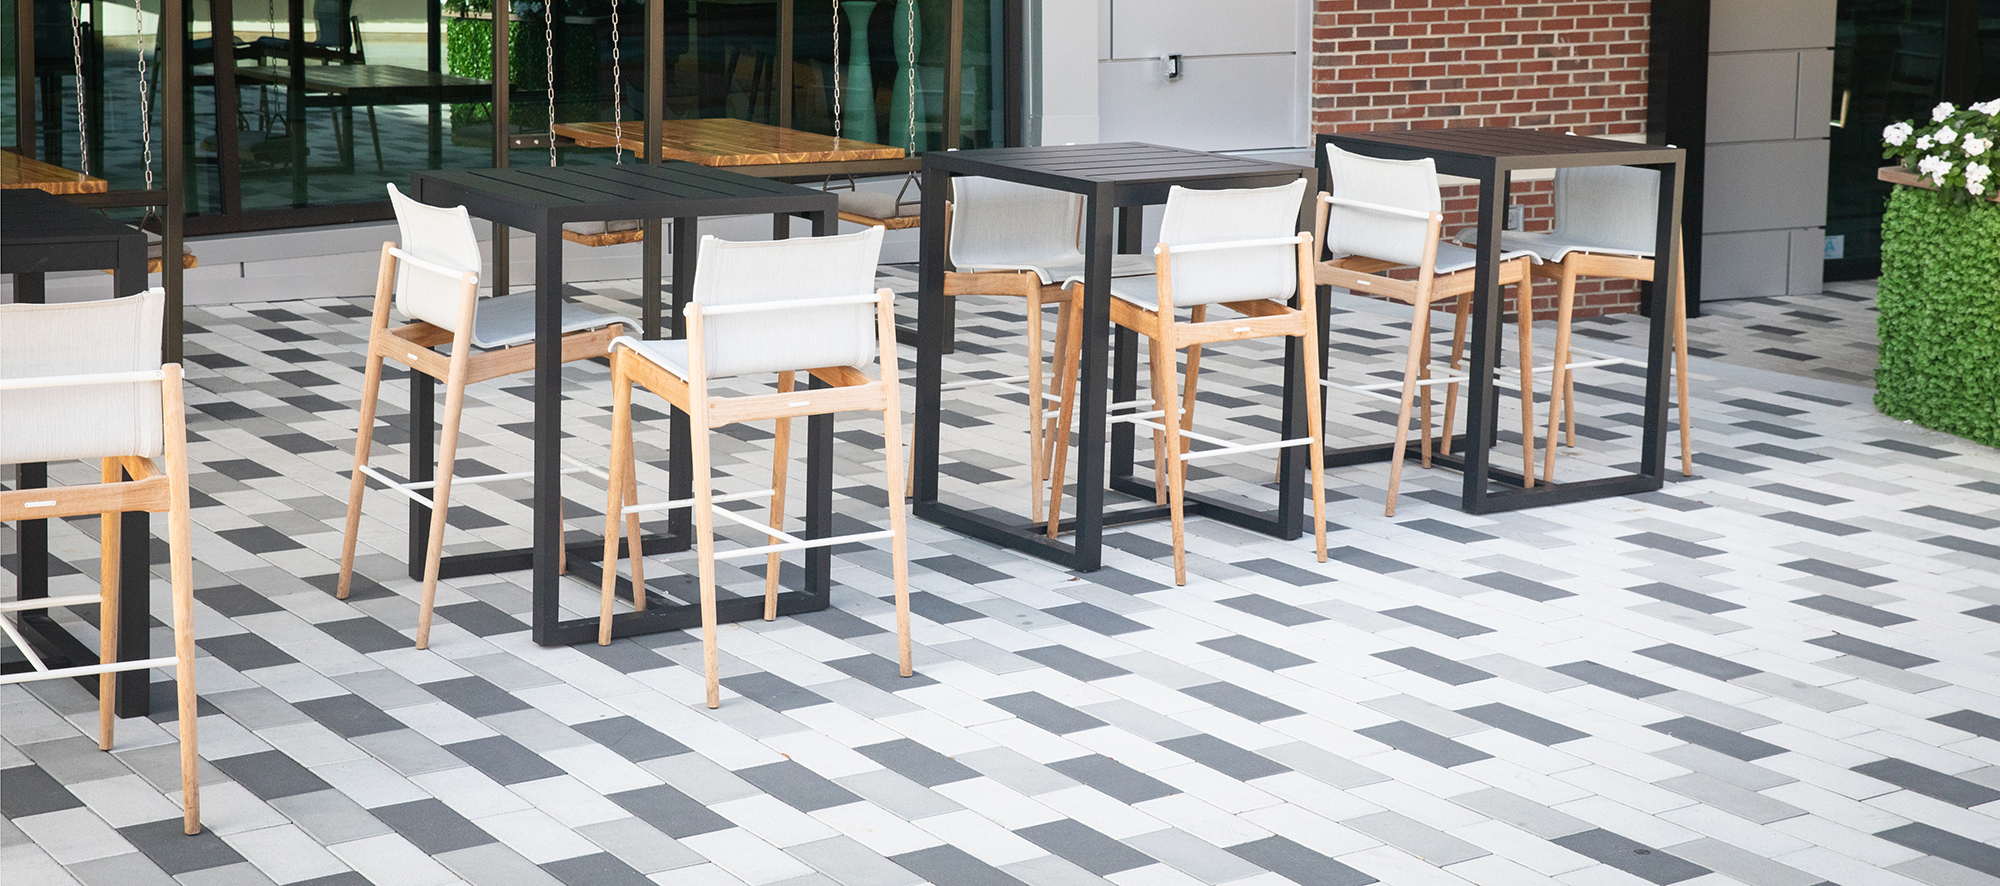 Tri-colored Promenade Plank pavers form a checkboard pattern underneath a quartet of bar chairs and tables in front of a brick building.